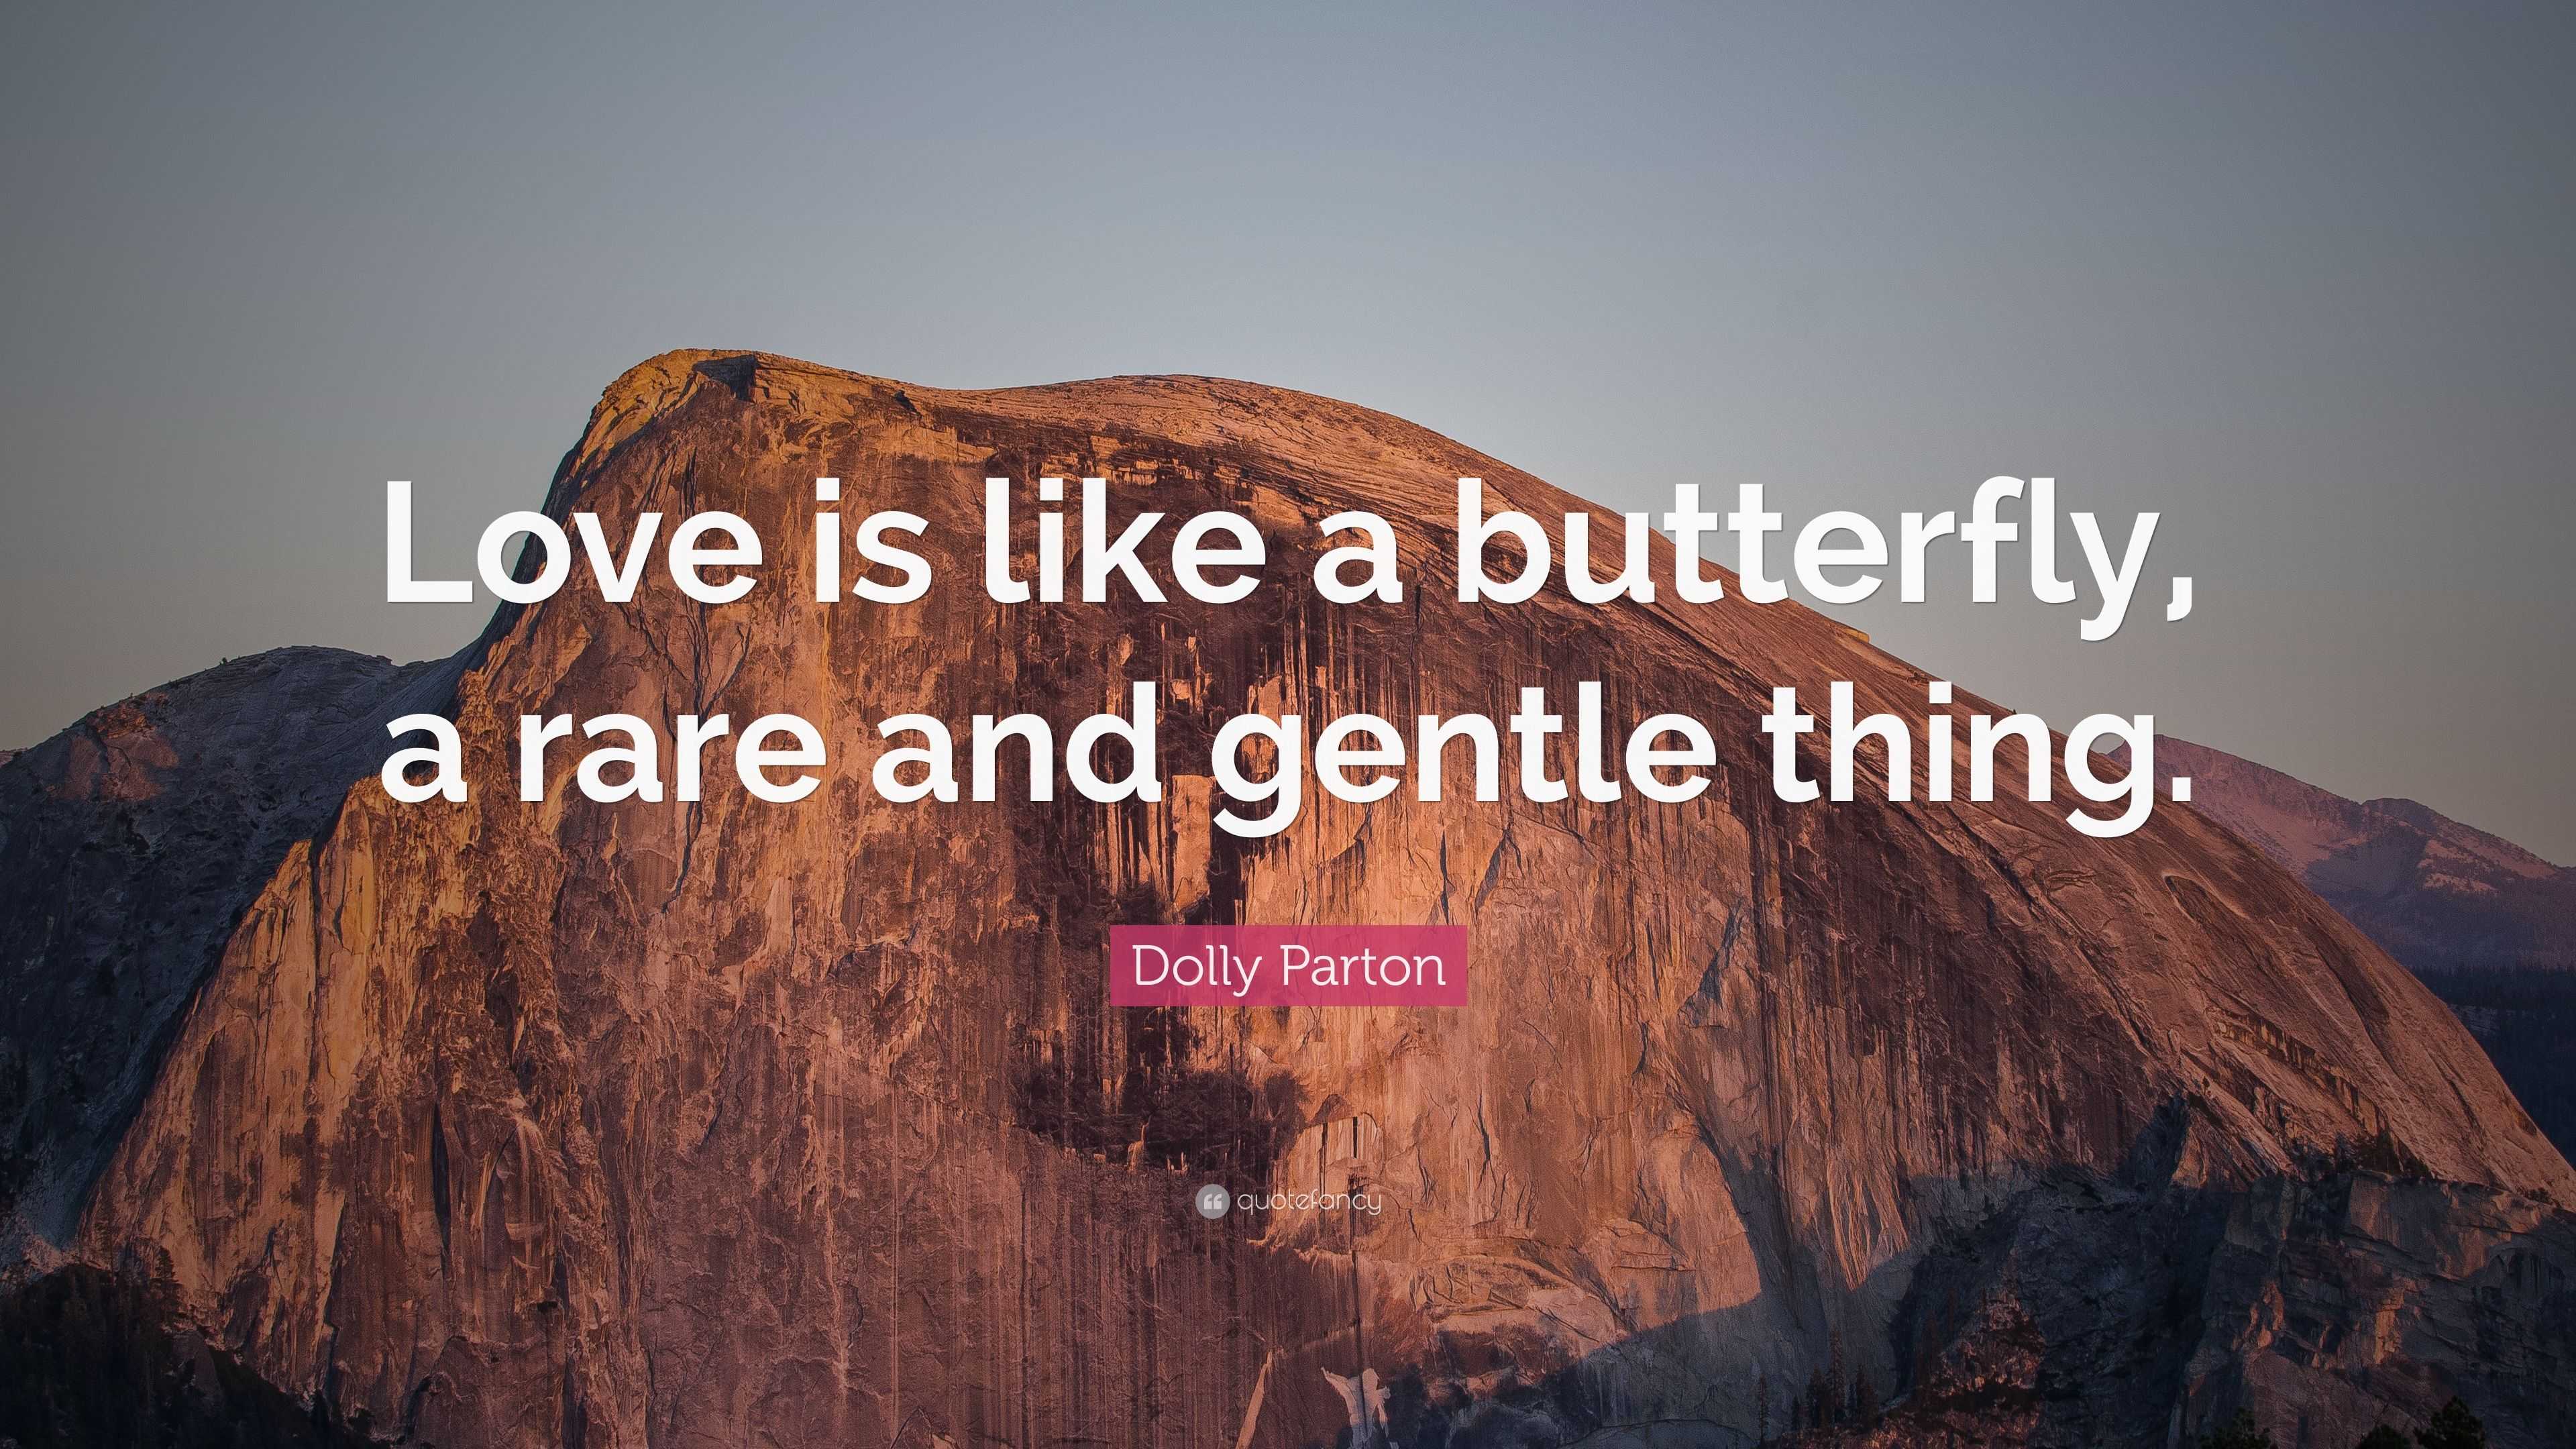 Dolly Parton Quote “Love is like a butterfly a rare and gentle thing